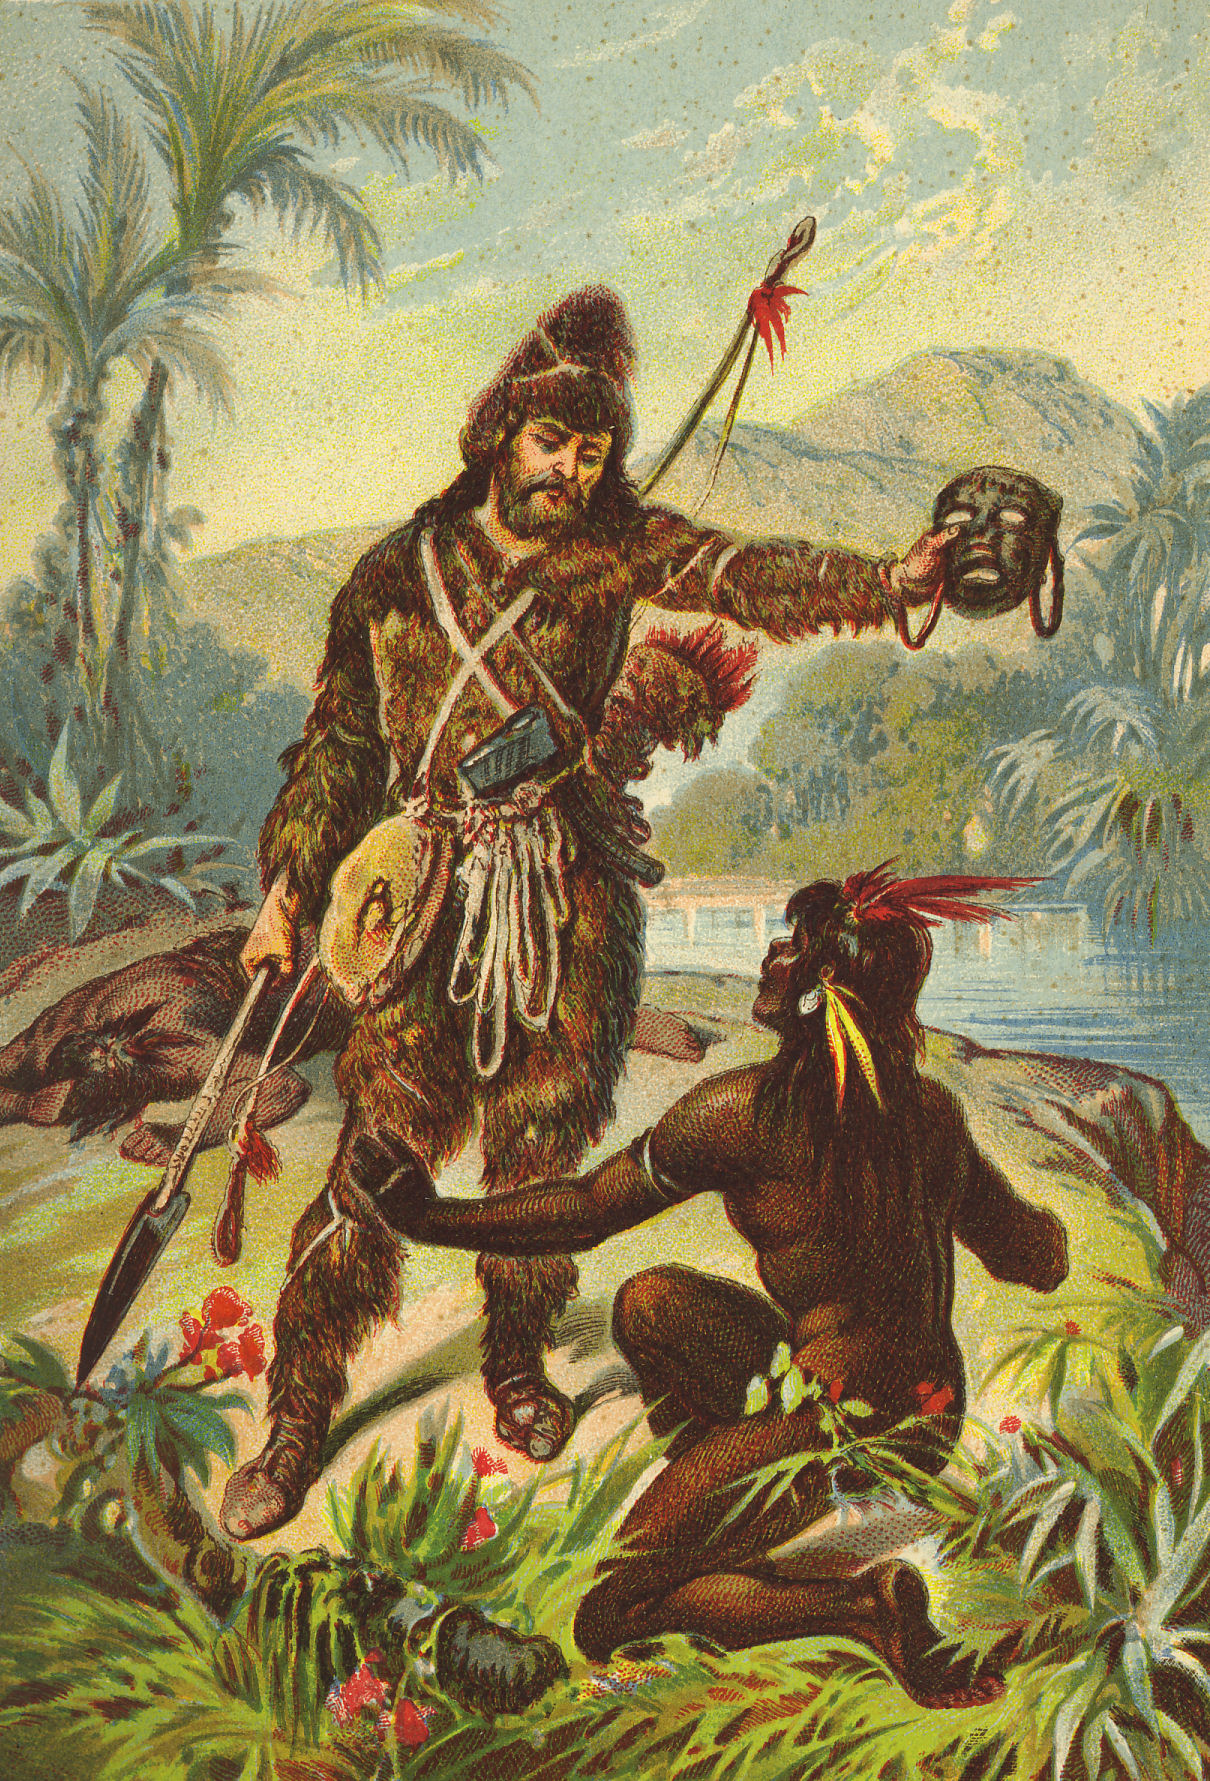 Video of the Day: Robinson Crusoe & the Rise of the West